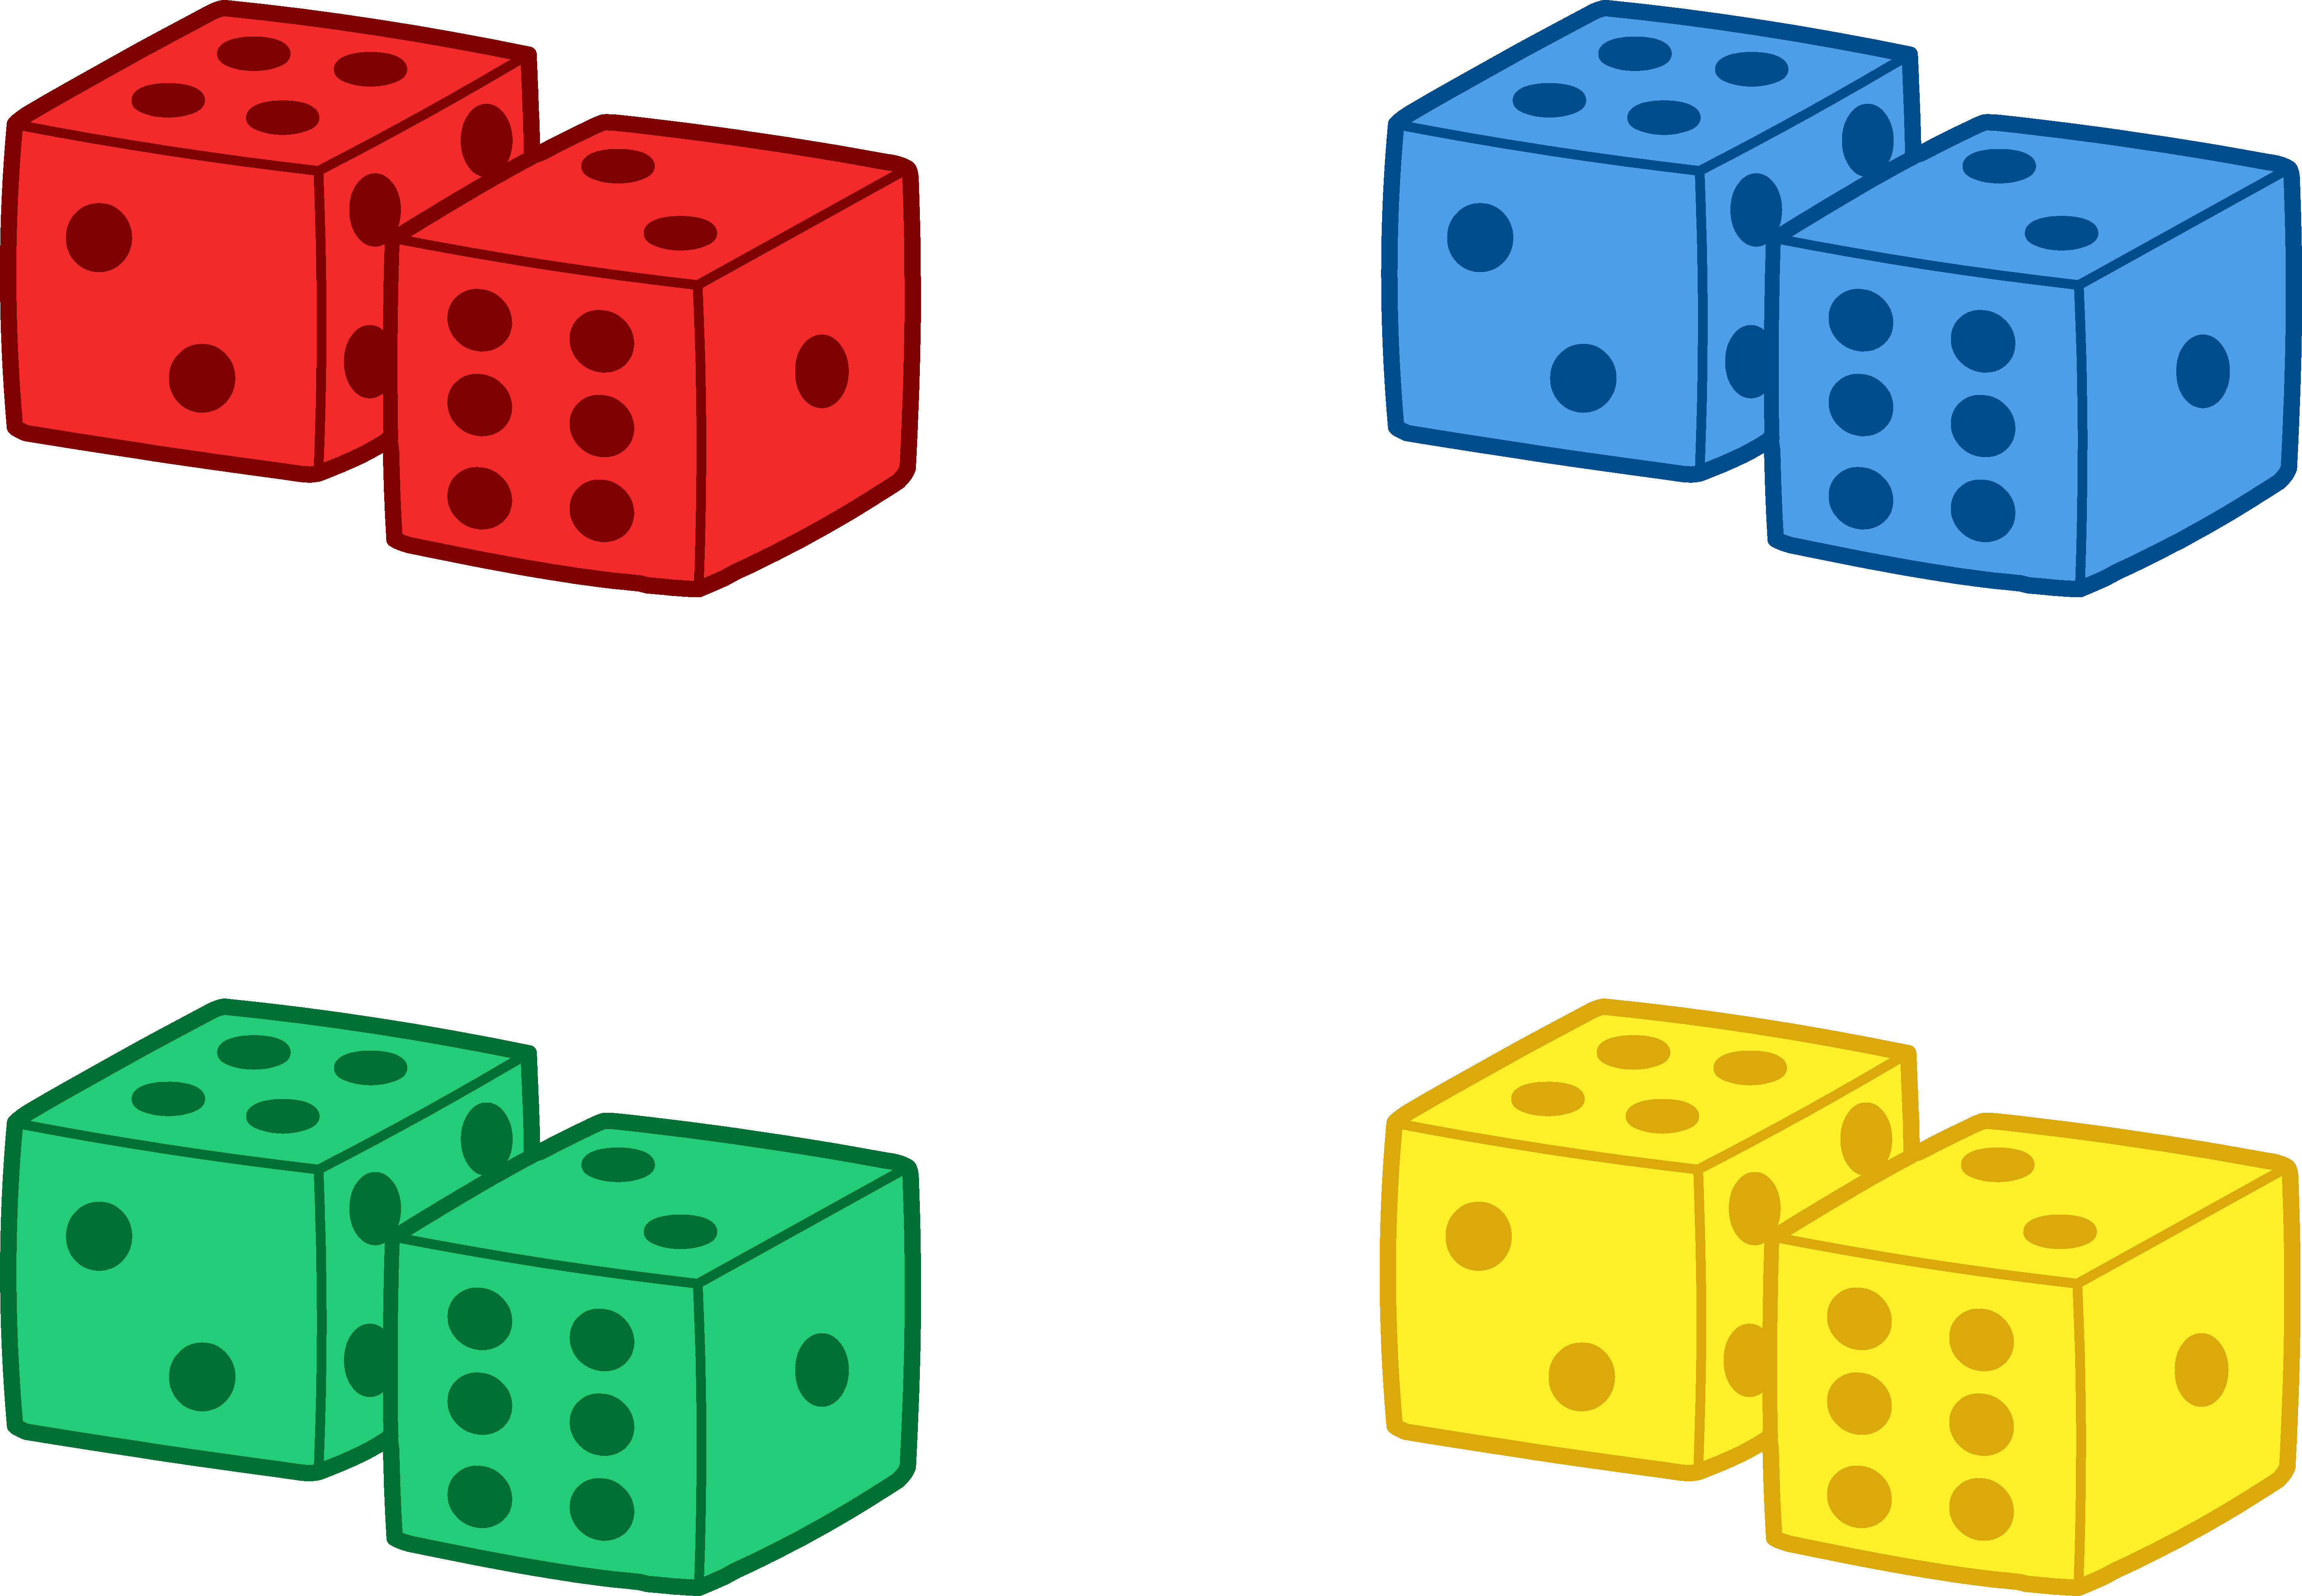 green dice clipart - photo #23